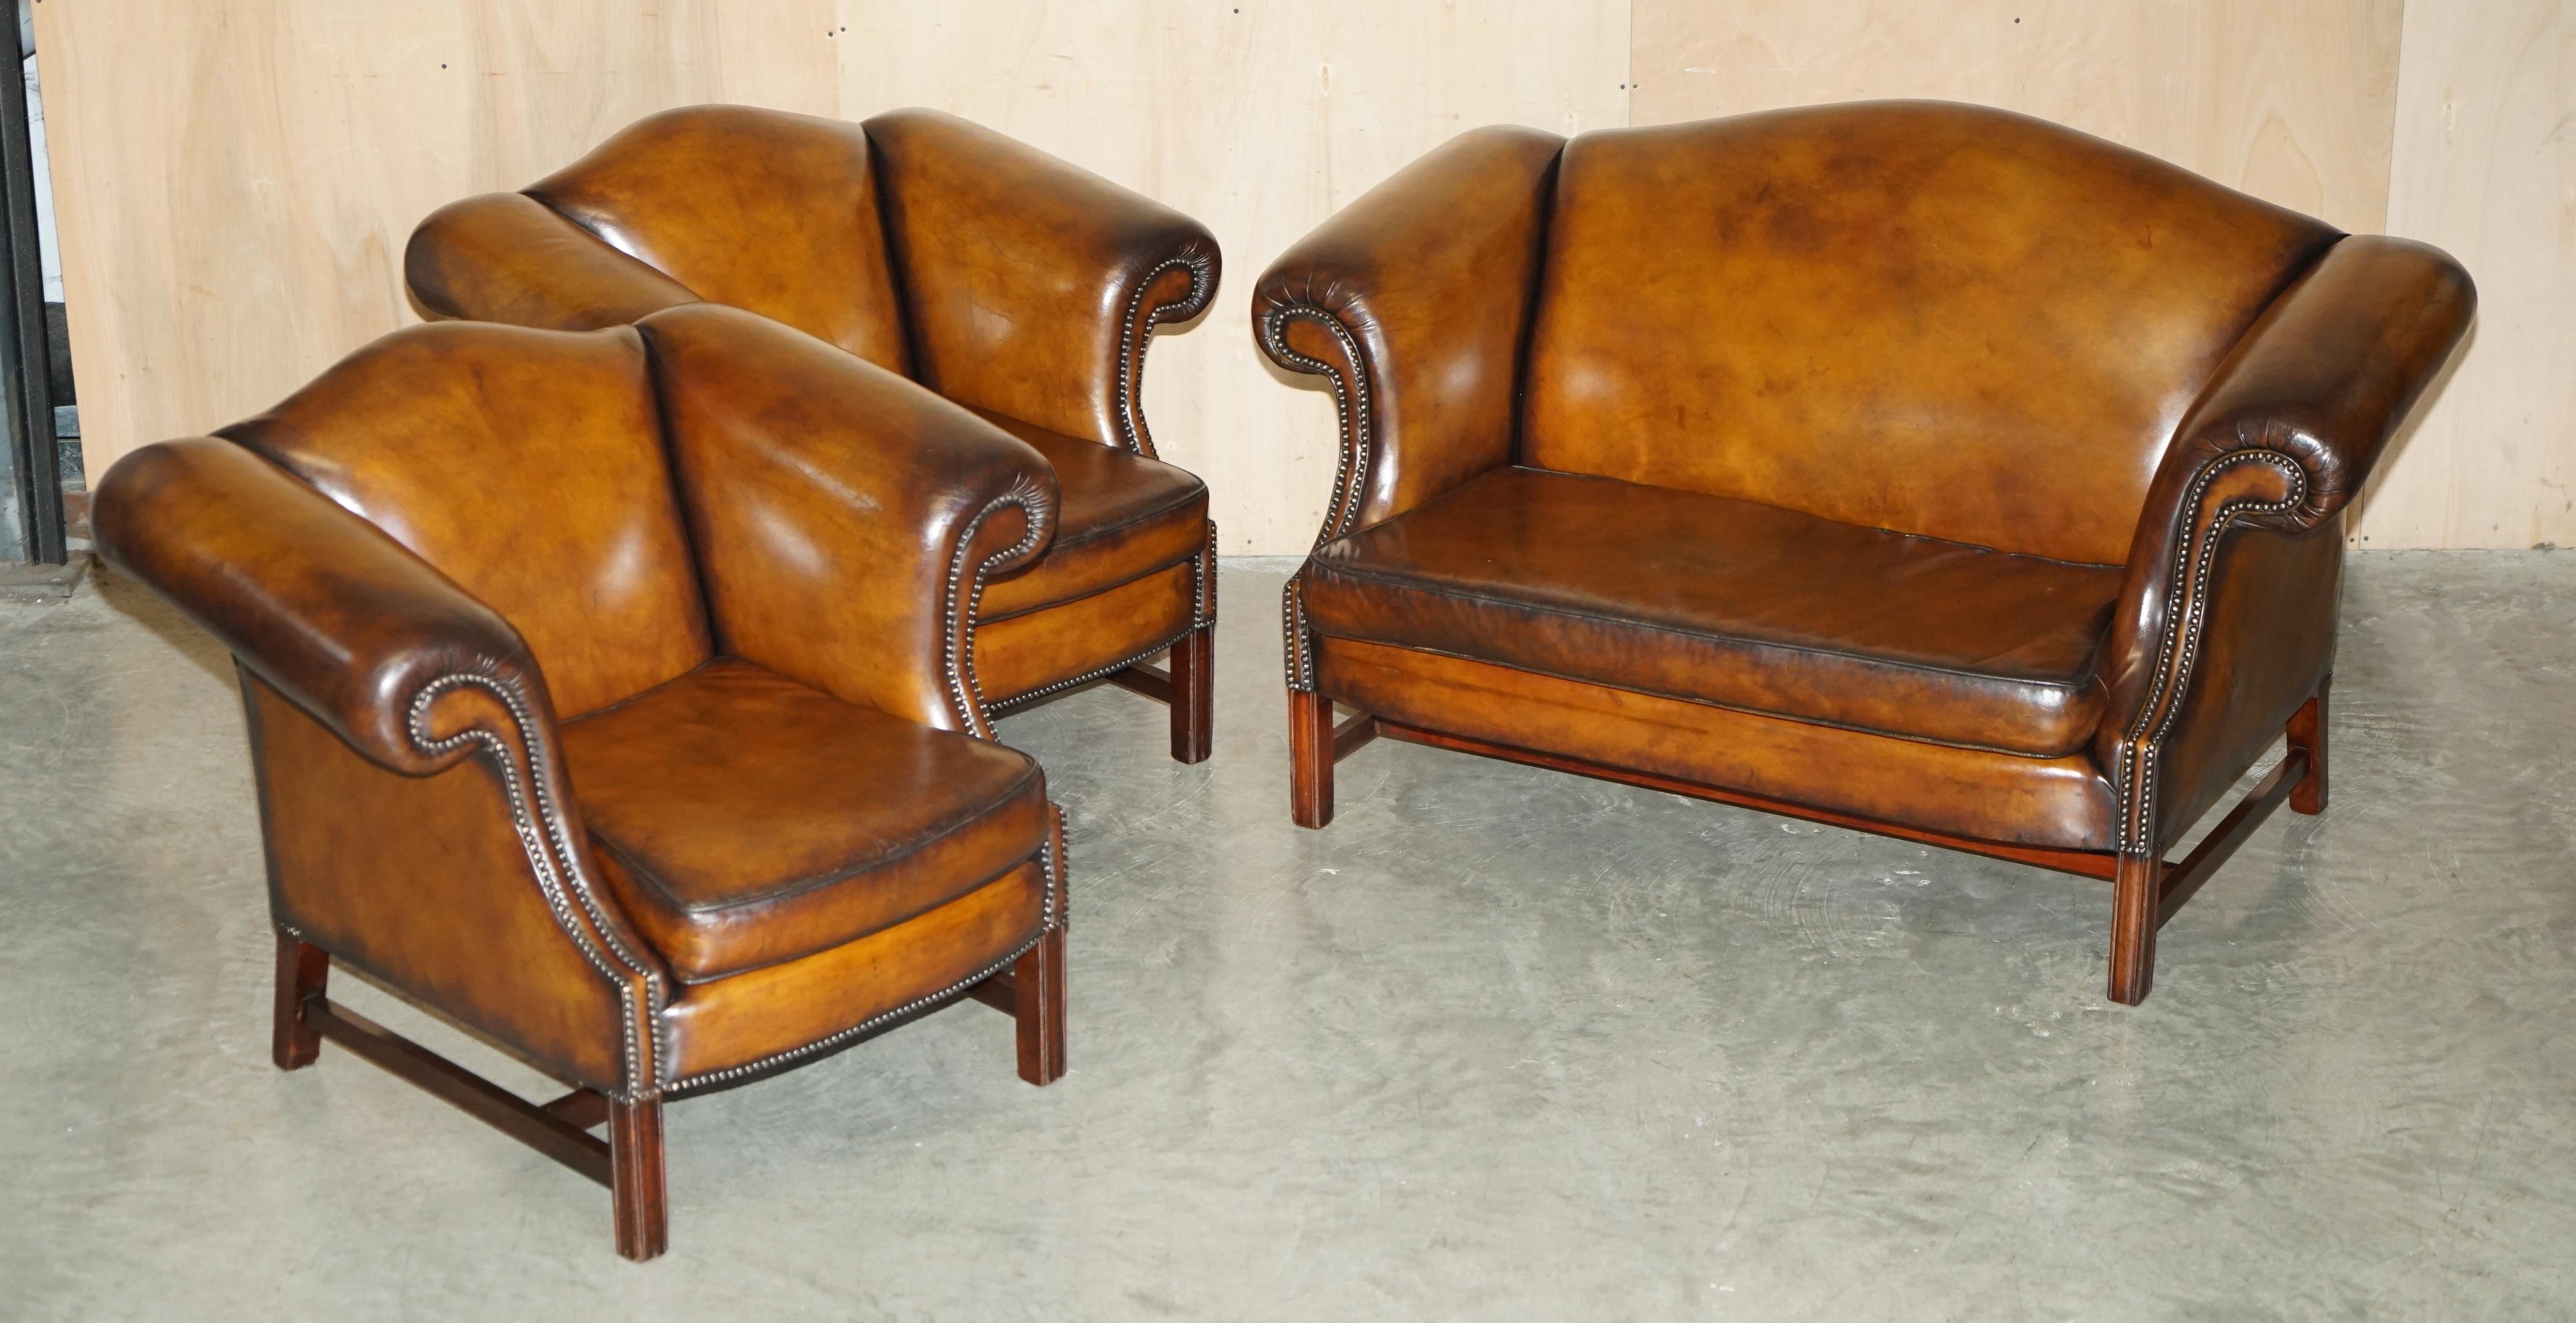 Royal House Antiques

Royal House Antiques is delighted to offer for sale this stunning, fully restored vintage hand dyed Cigar Brown leather Humpback Antique style three piece suite 

Please note the delivery fee listed is just a guide, it covers